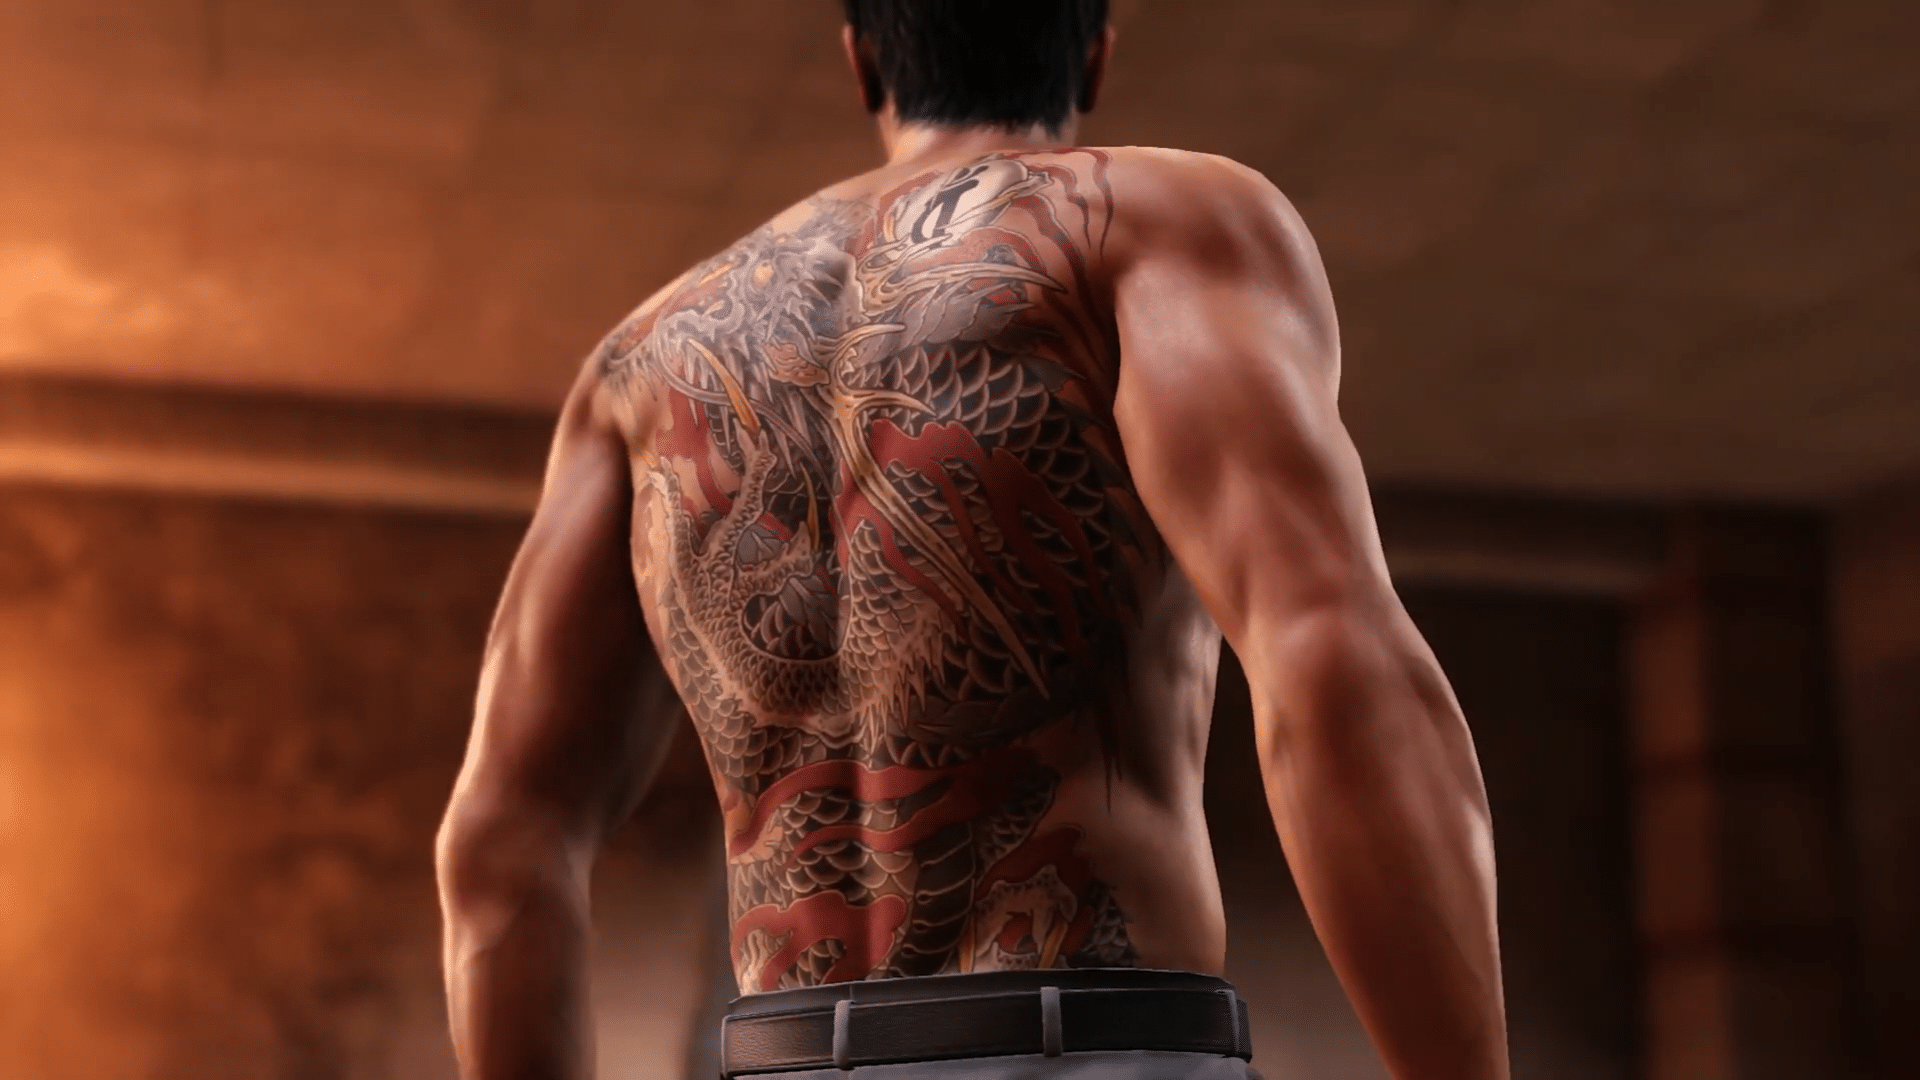 1034 Yakuza Photos and Premium High Res Pictures  Getty Images